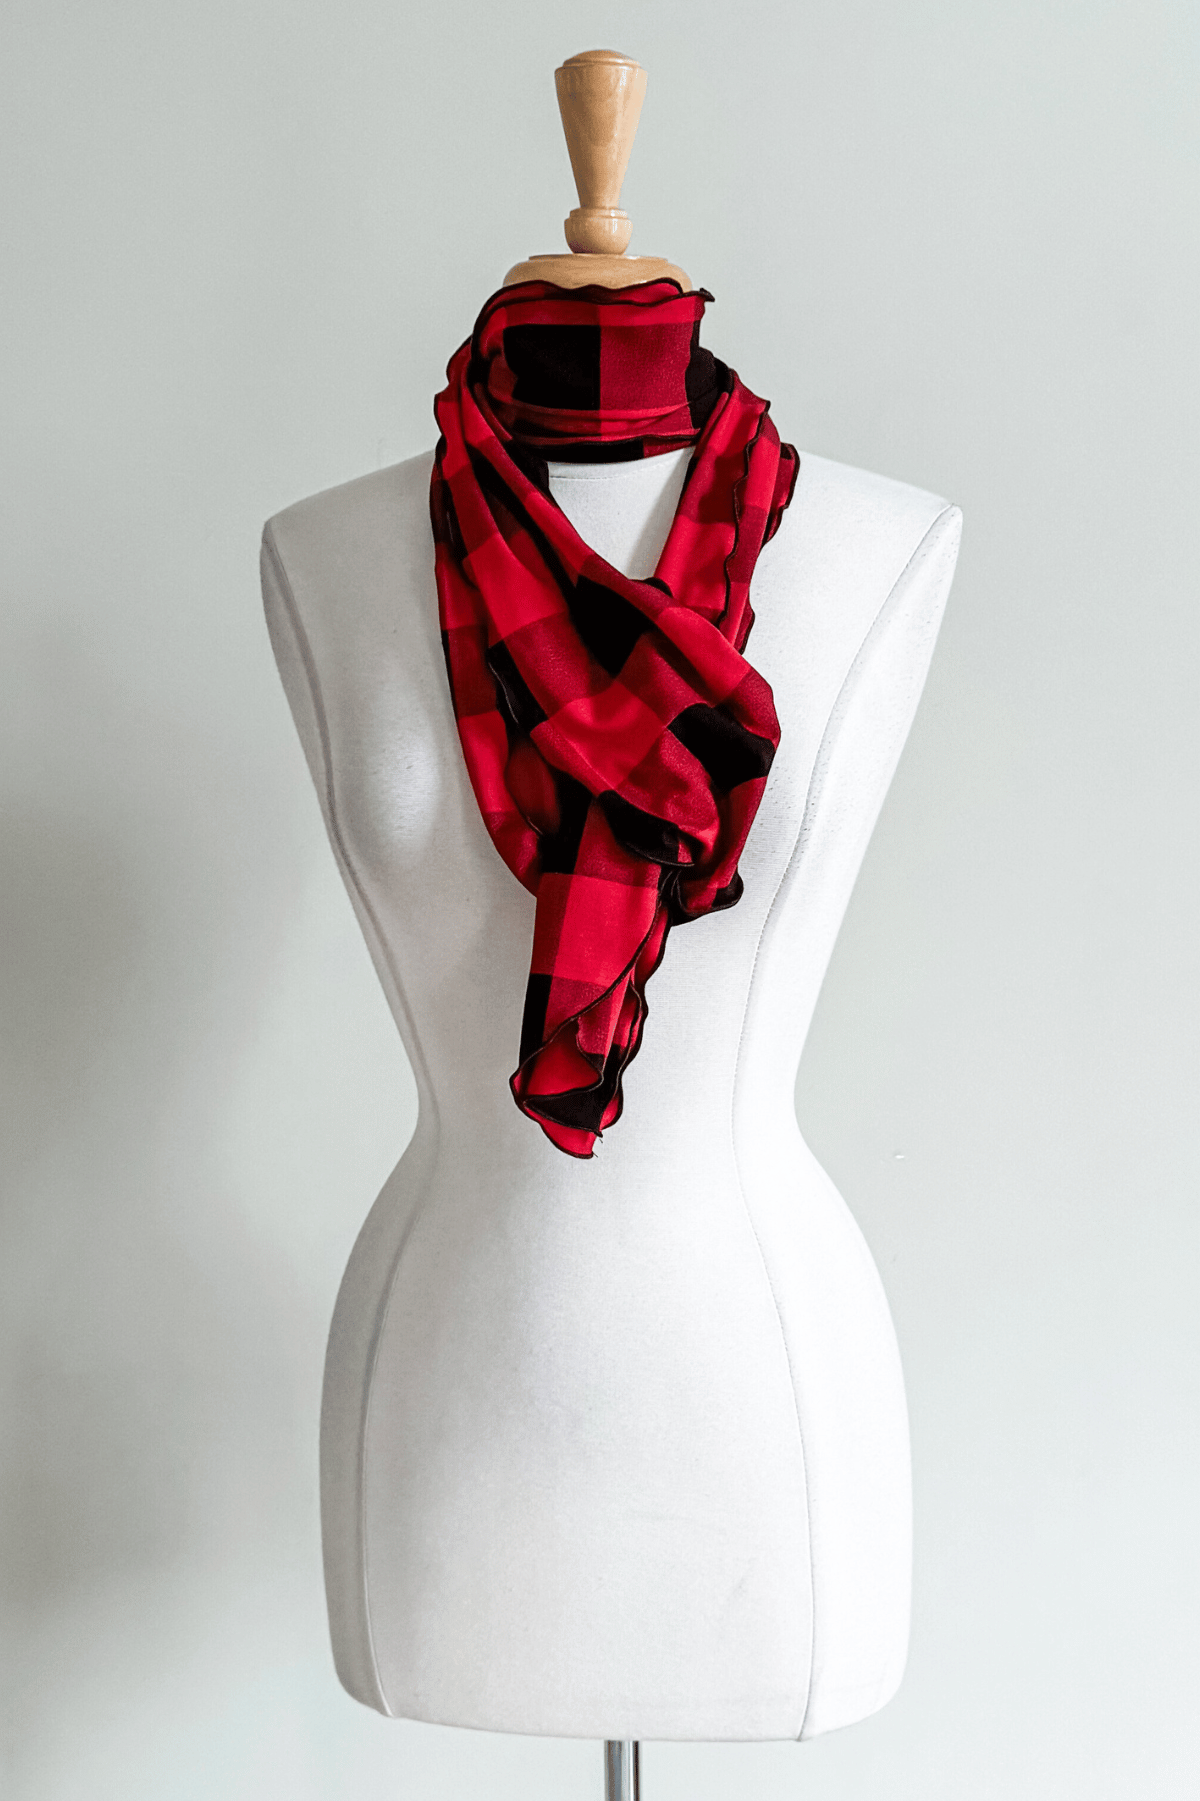 Reversible Sash in Canadiana as a scarf